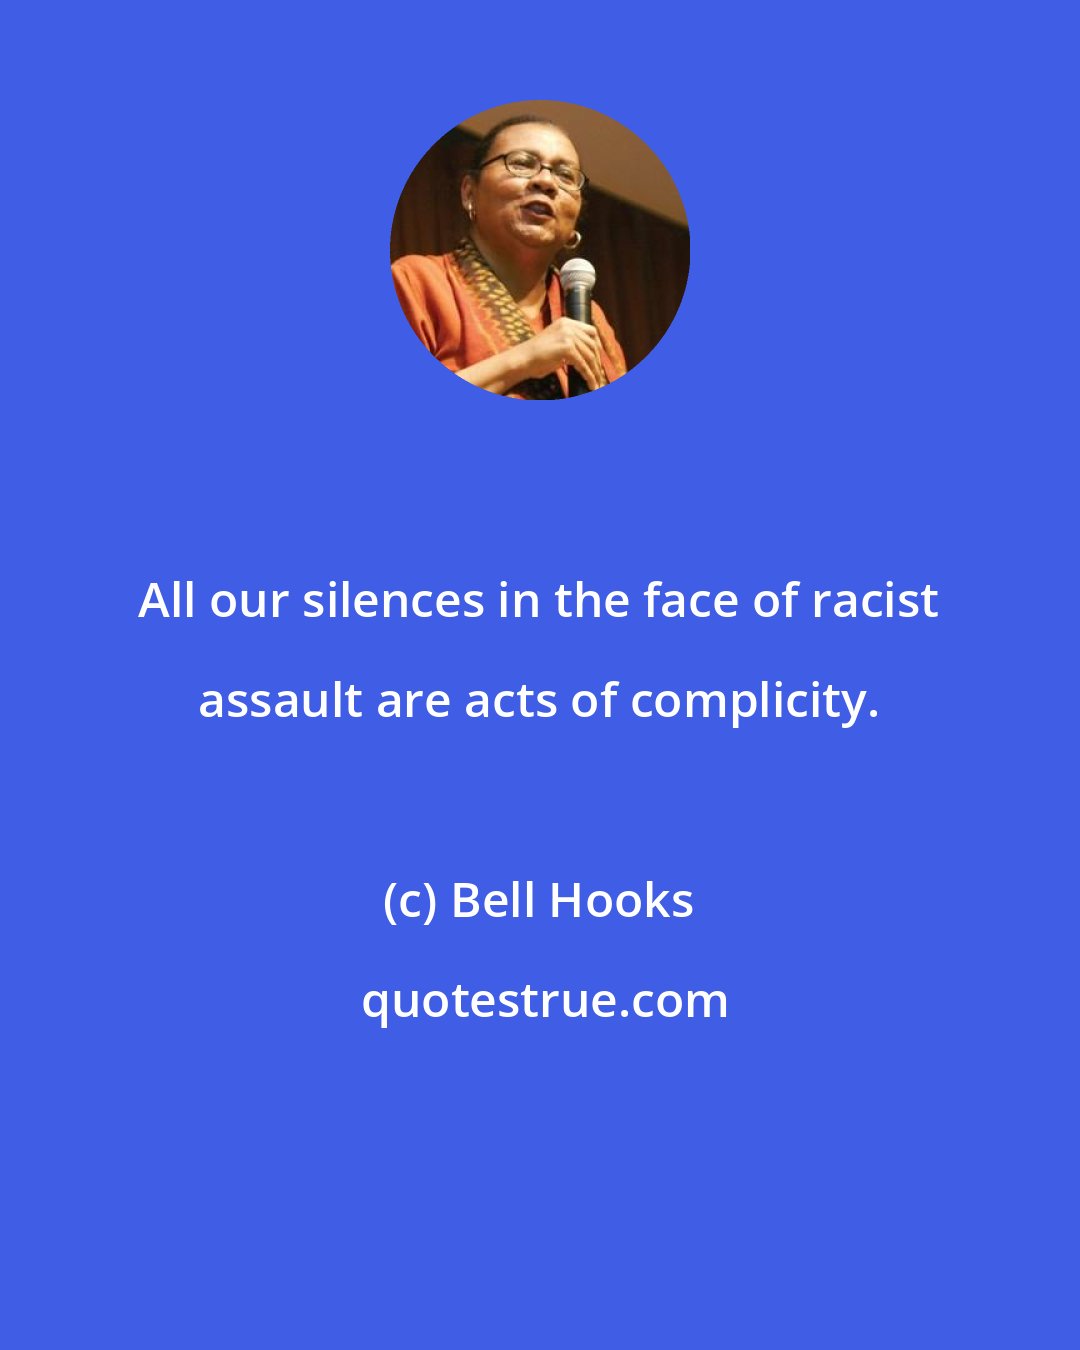 Bell Hooks: All our silences in the face of racist assault are acts of complicity.